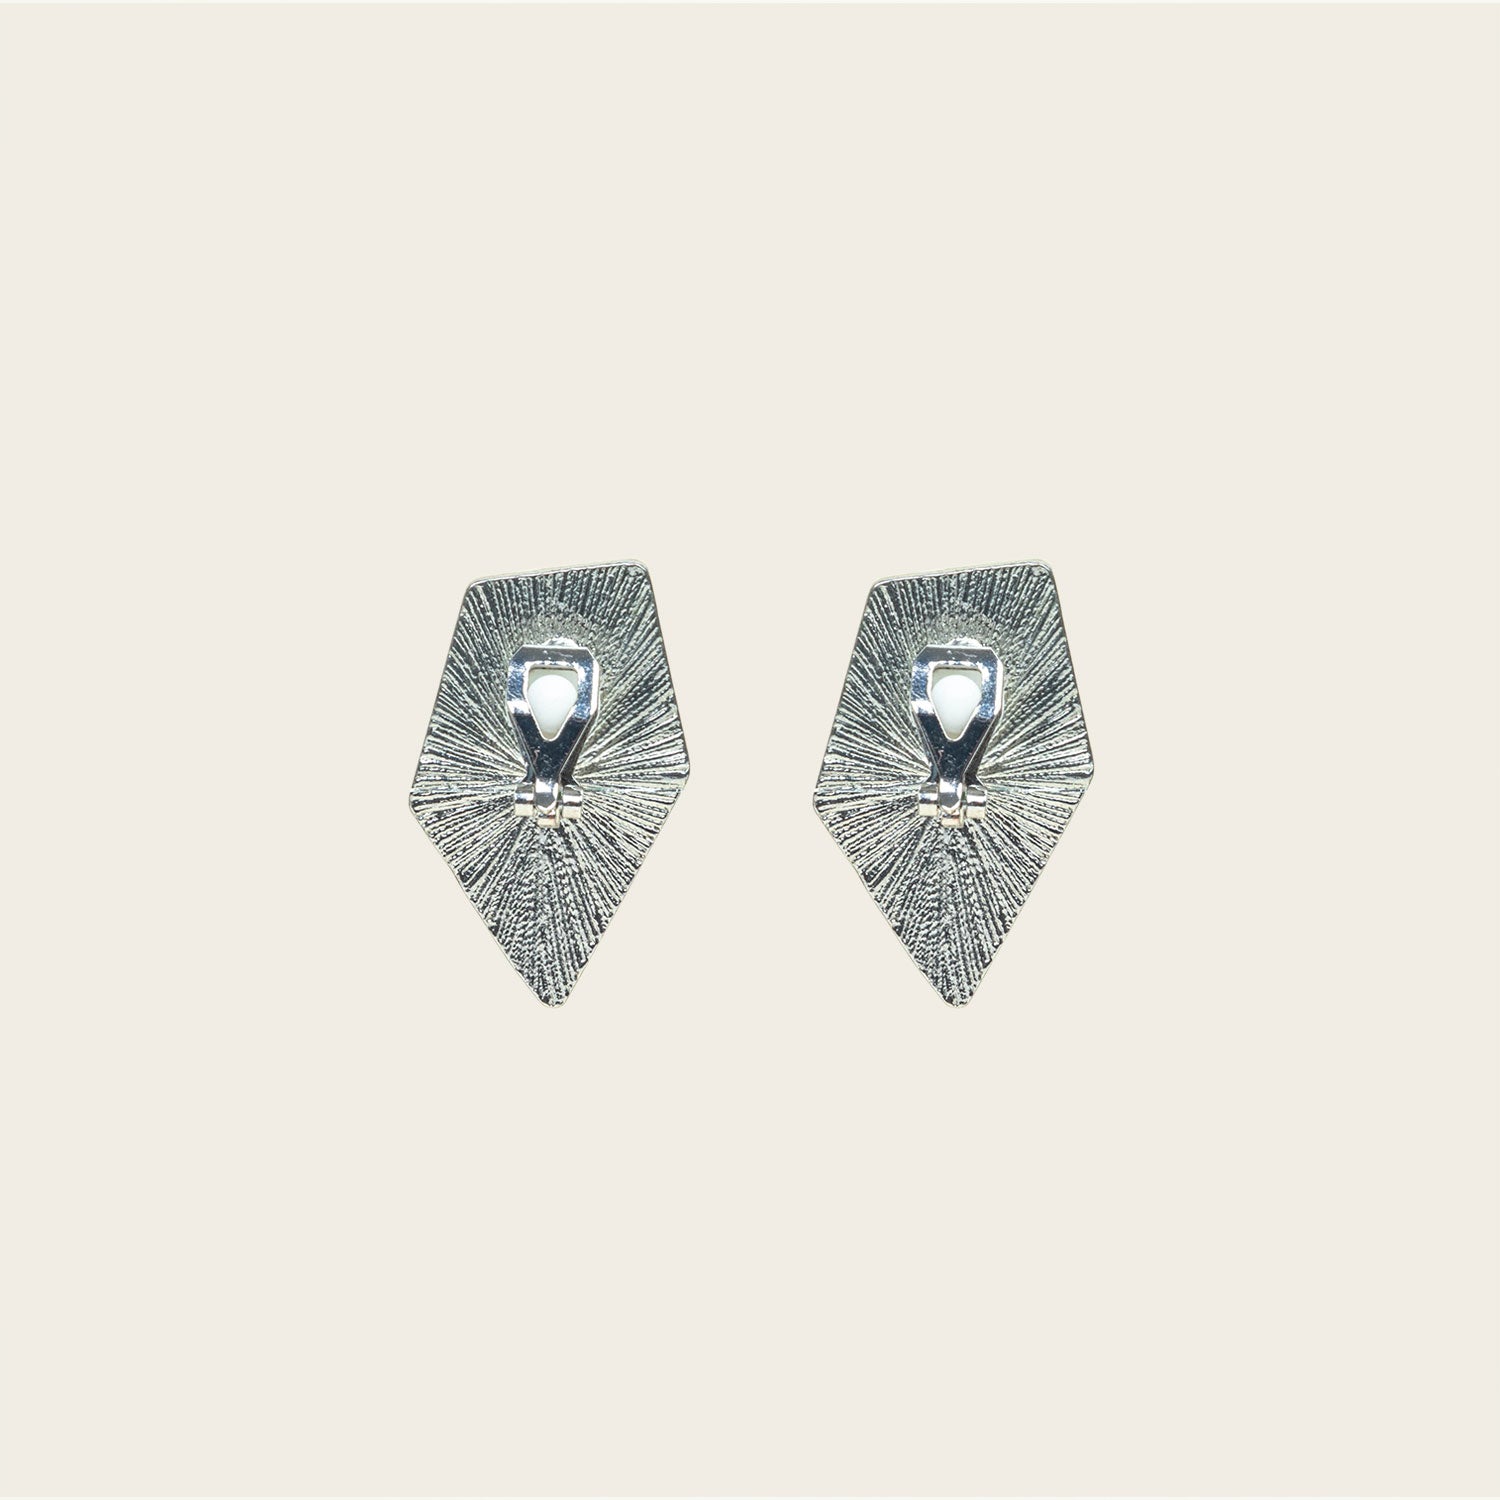 Image of the Vesper Clip On Earrings in Silver are padded clip-on earrings with a secure hold. Perfect for all ear types, they offer a comfortable wear for 8-12 hours. Made of zinc and copper alloy, the earrings come with a removable black rubber padding and can be worn as pictured. Please note, item is sold as one pair.